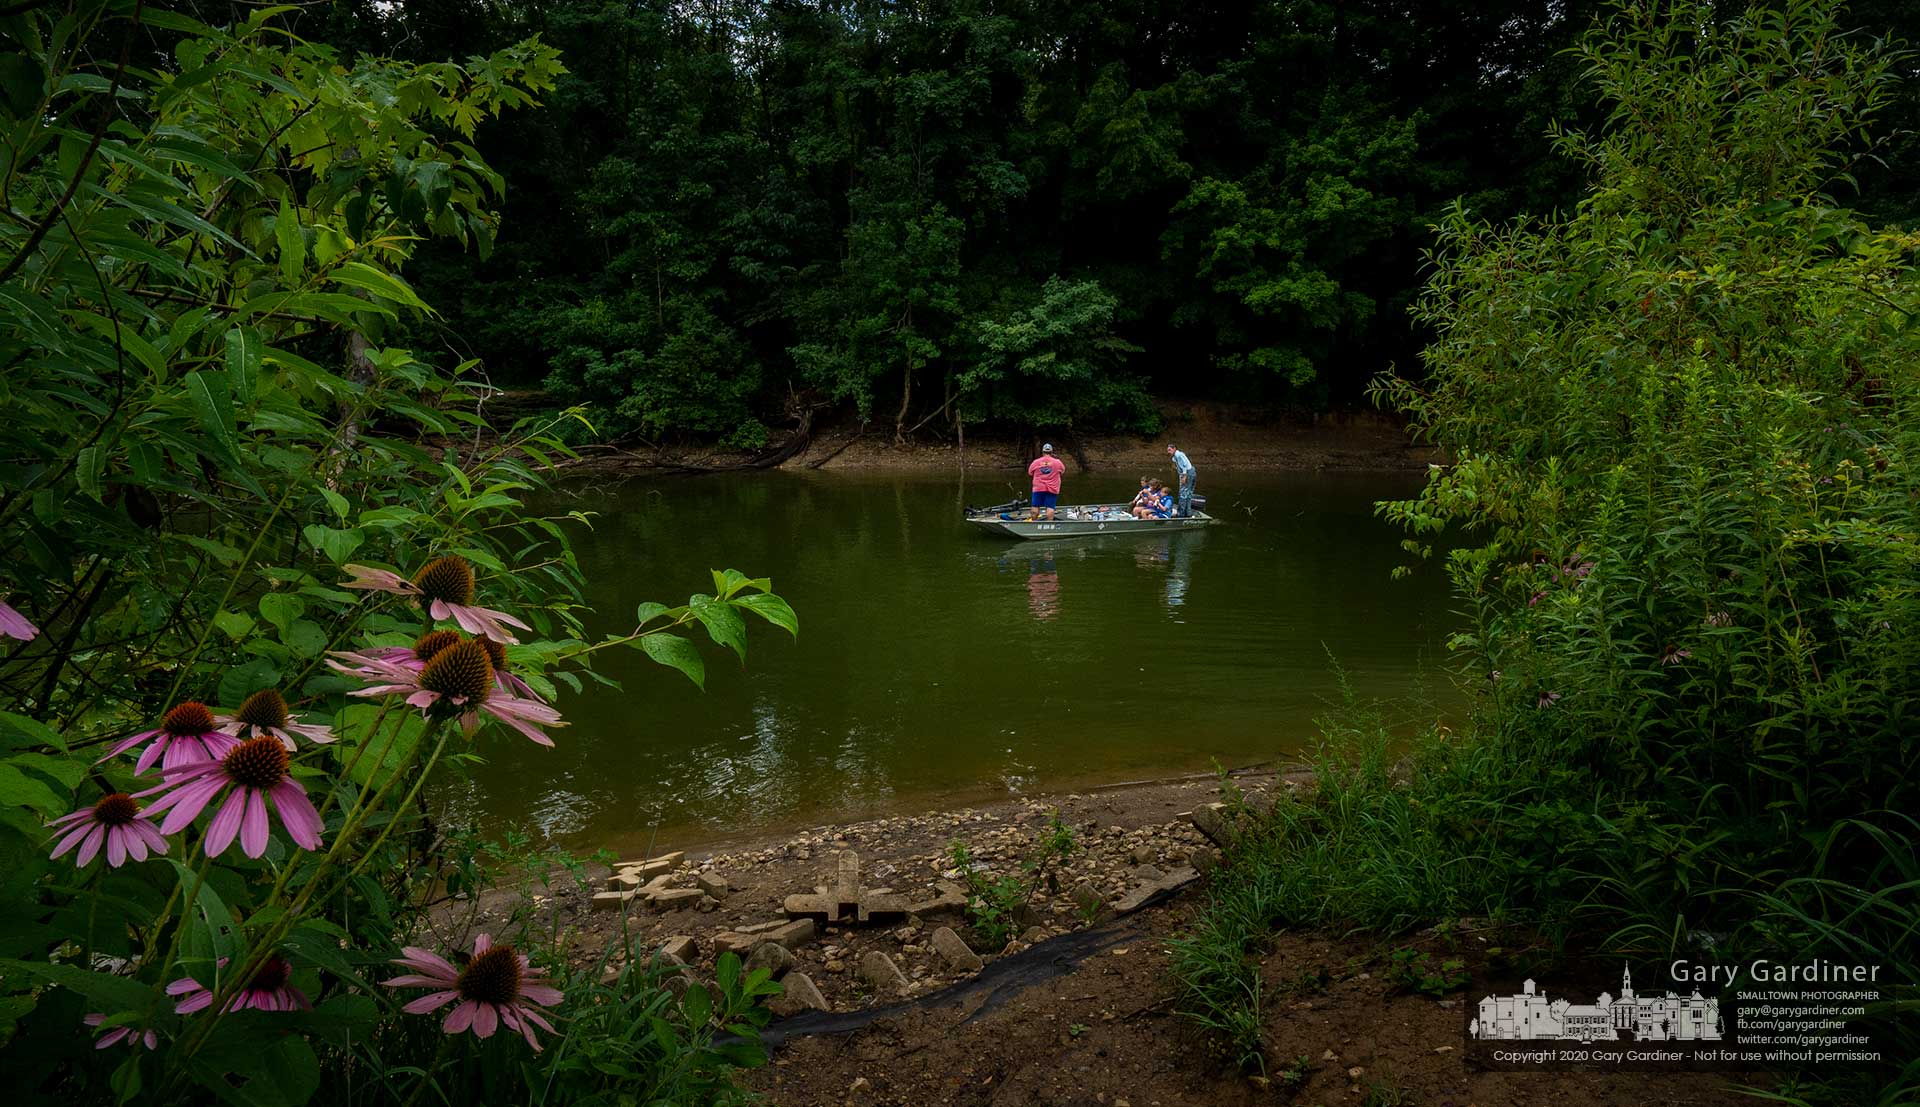 A pair of adult anglers share their boat and a pizza with three children as they navigate from the inlet at Red Bank Park near to where they picked up the to-go pizza. My Final Photo for Aug. 4, 2020.